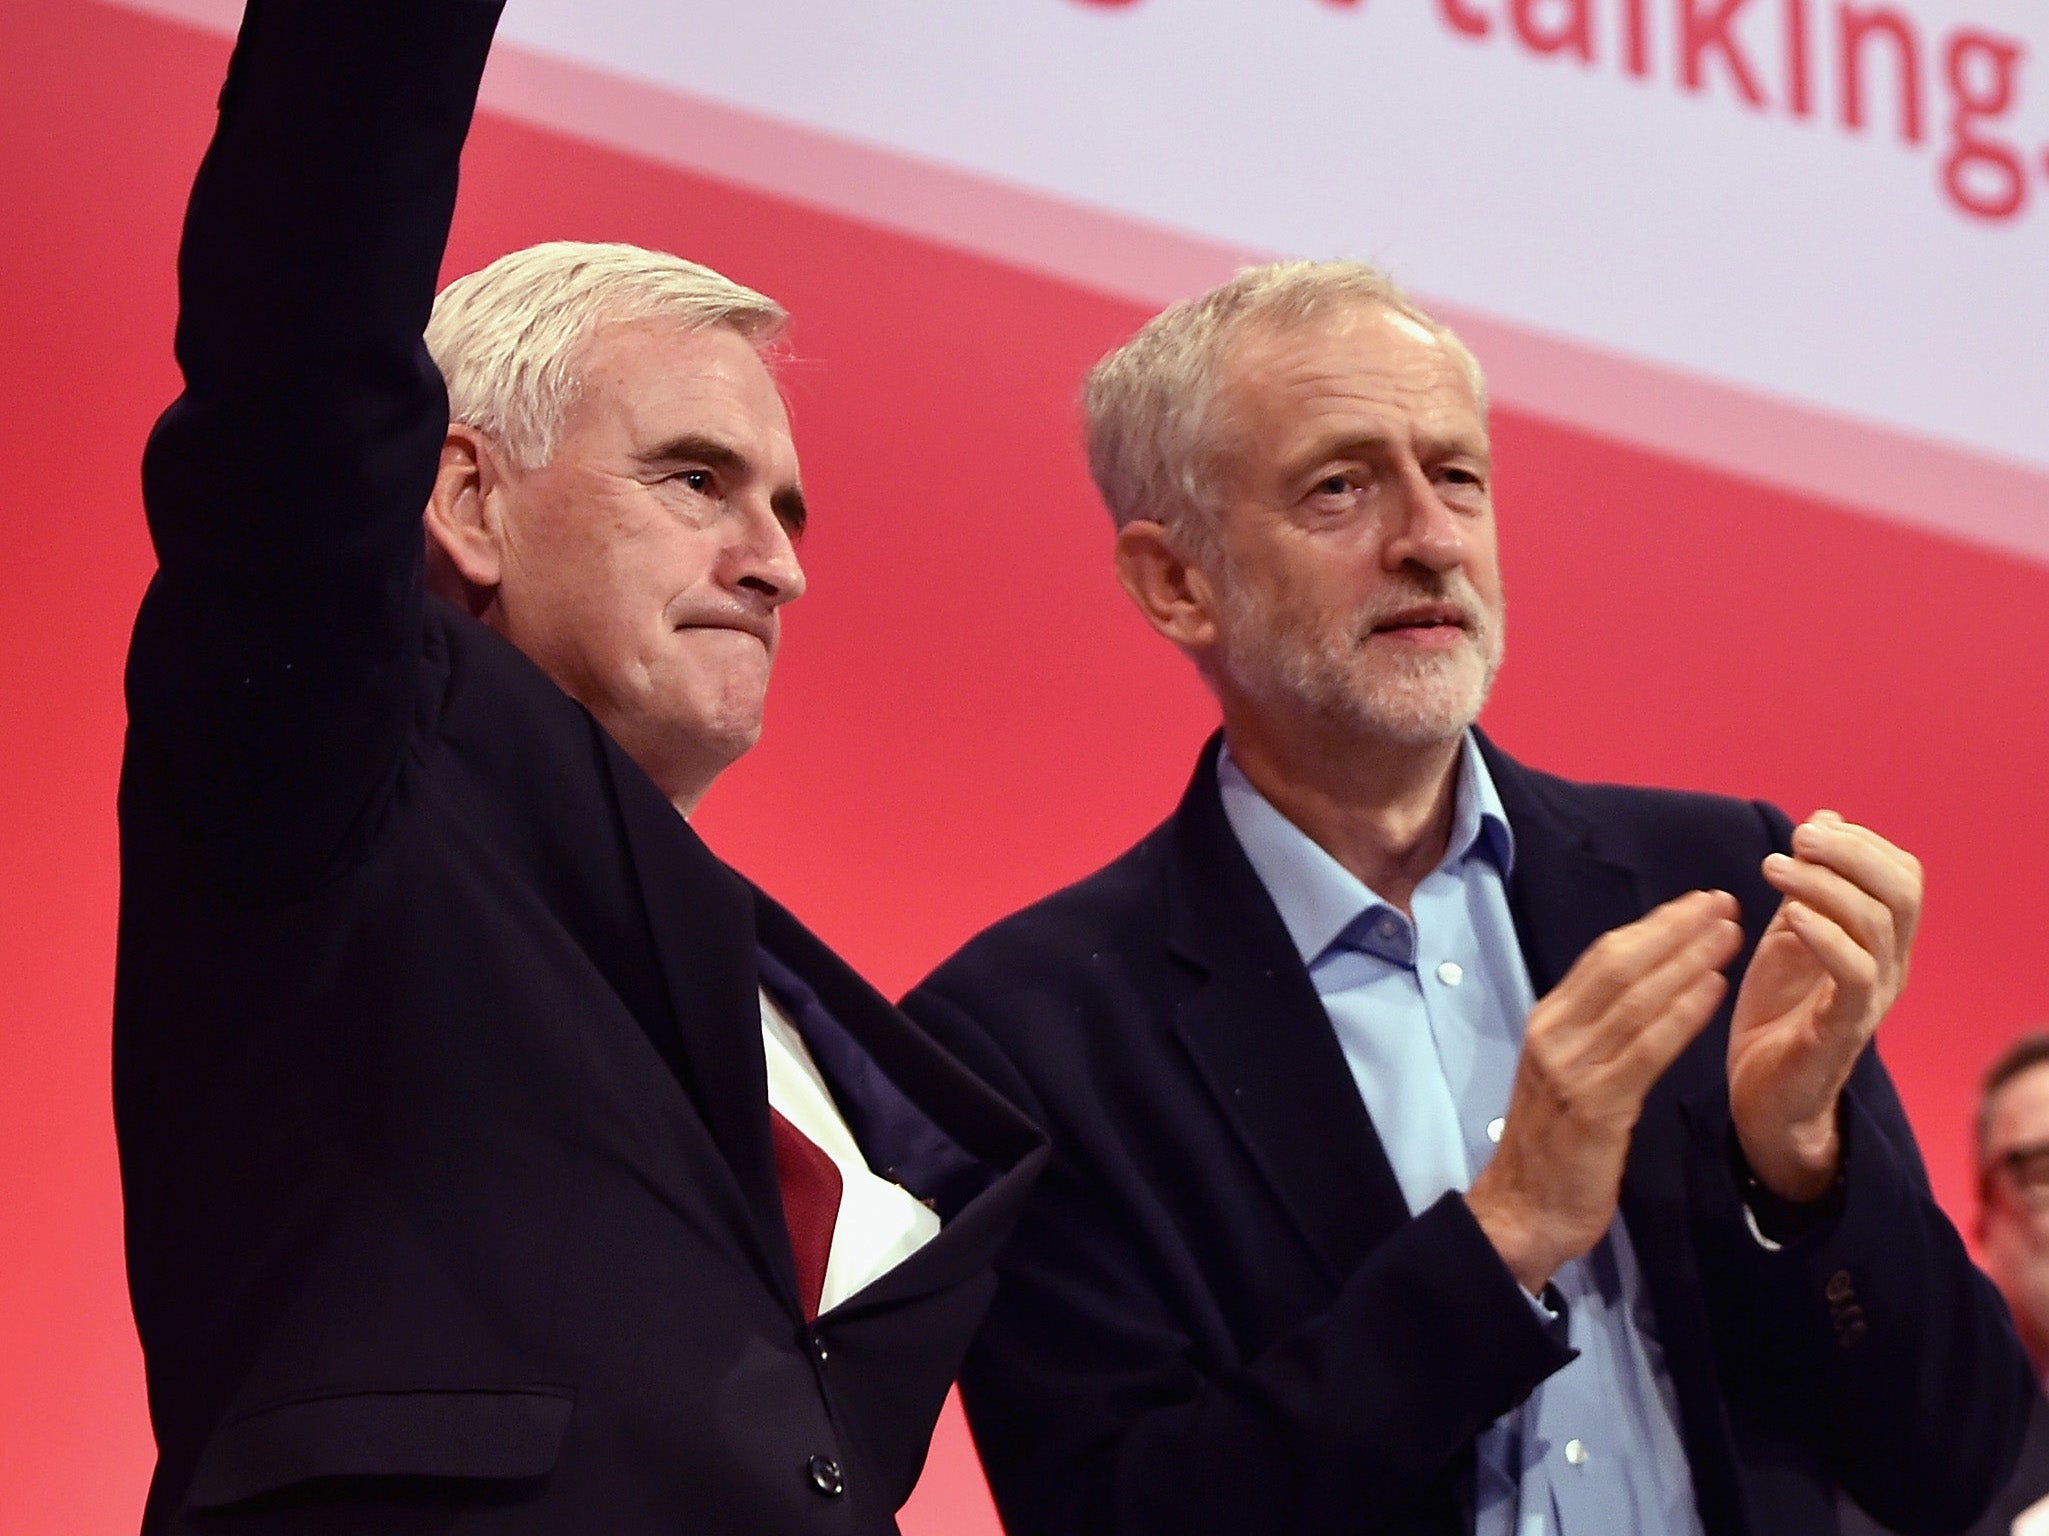 Shadow chancellor John McDonnell and Jeremy Corbyn take applause after addressing the Labour Party autumn conference